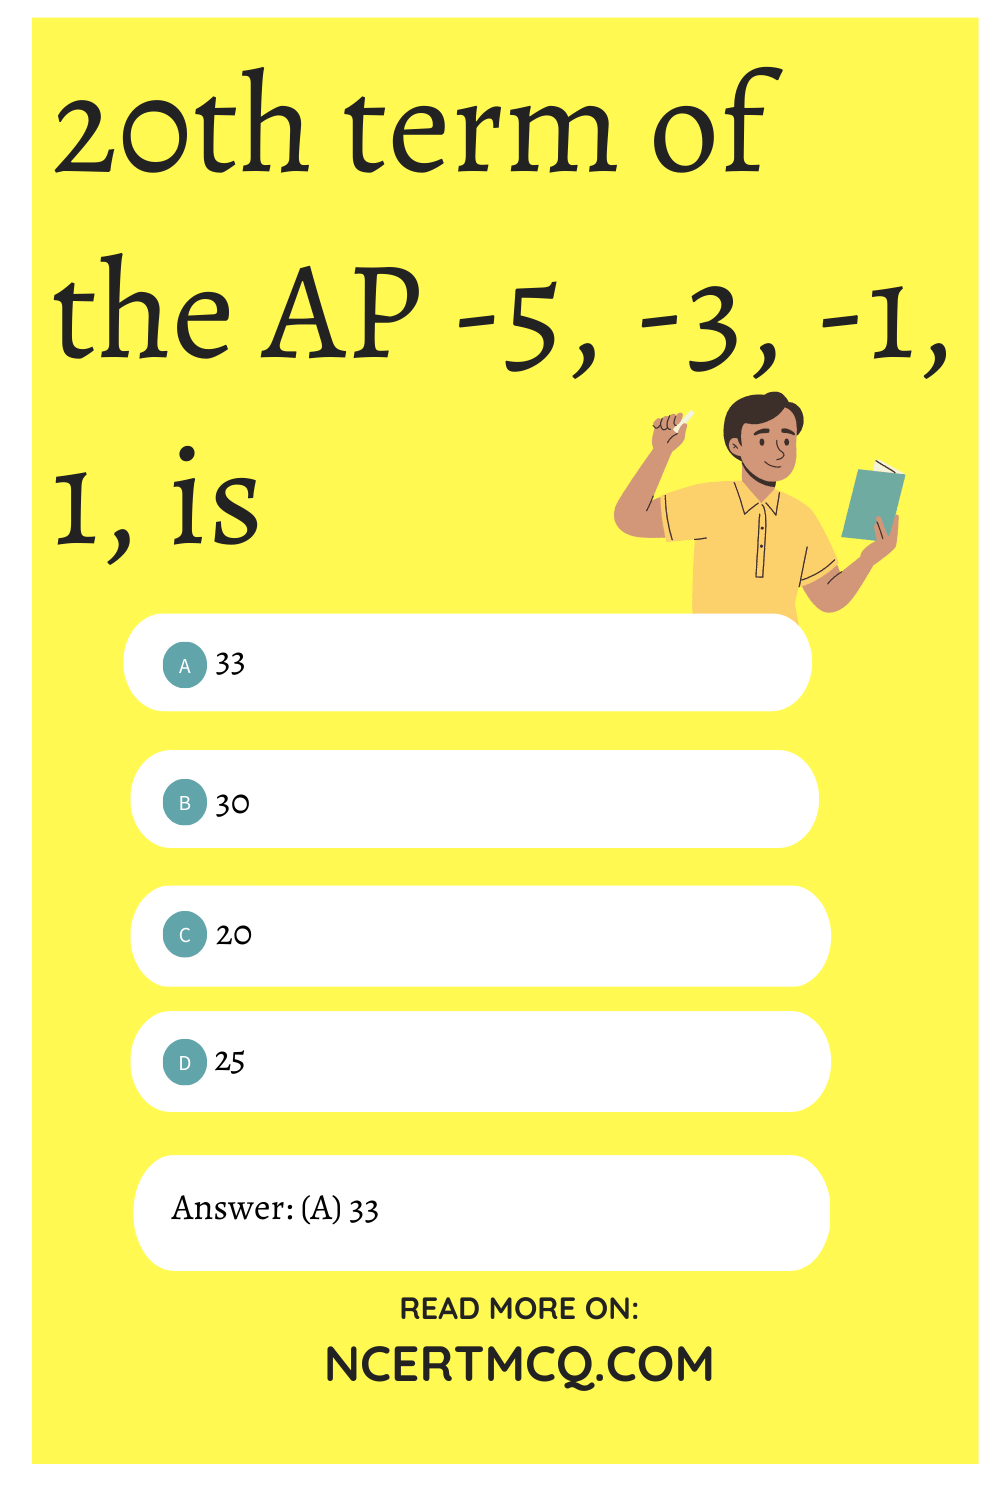 20th term of the AP -5, -3, -1, 1, is